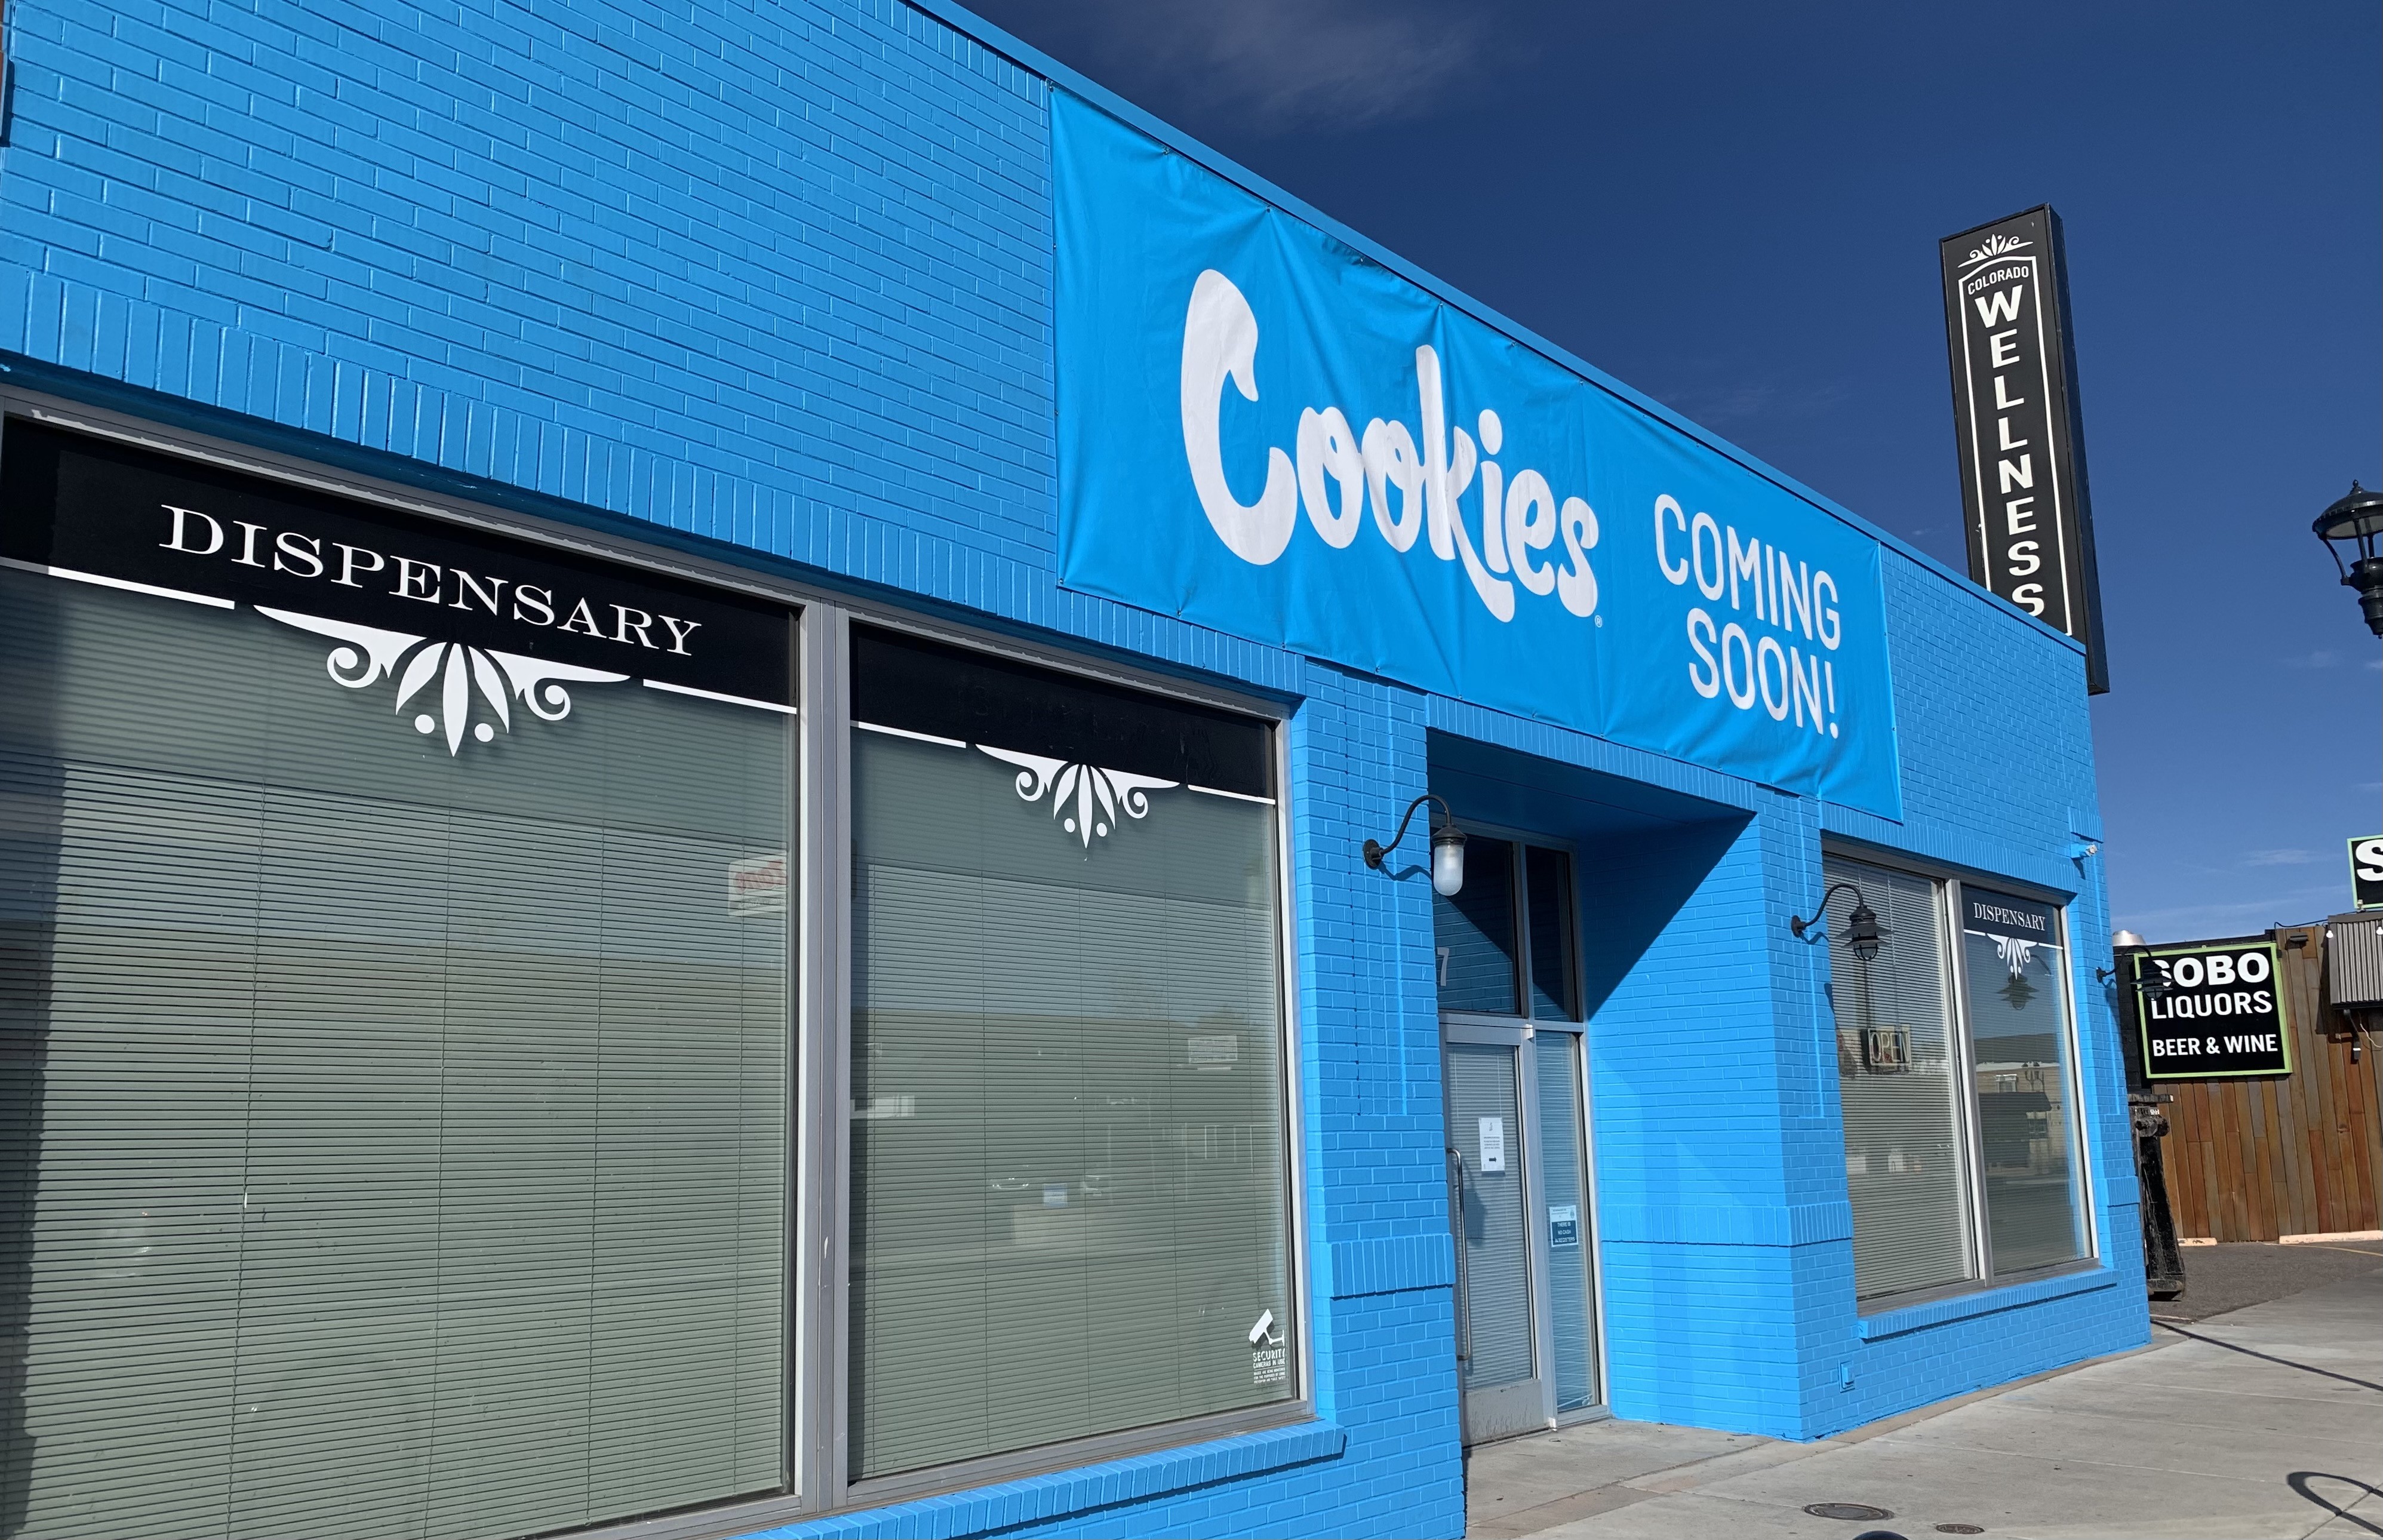 Cookies Cannabis Company Expanding To Albuquerque, 49% OFF